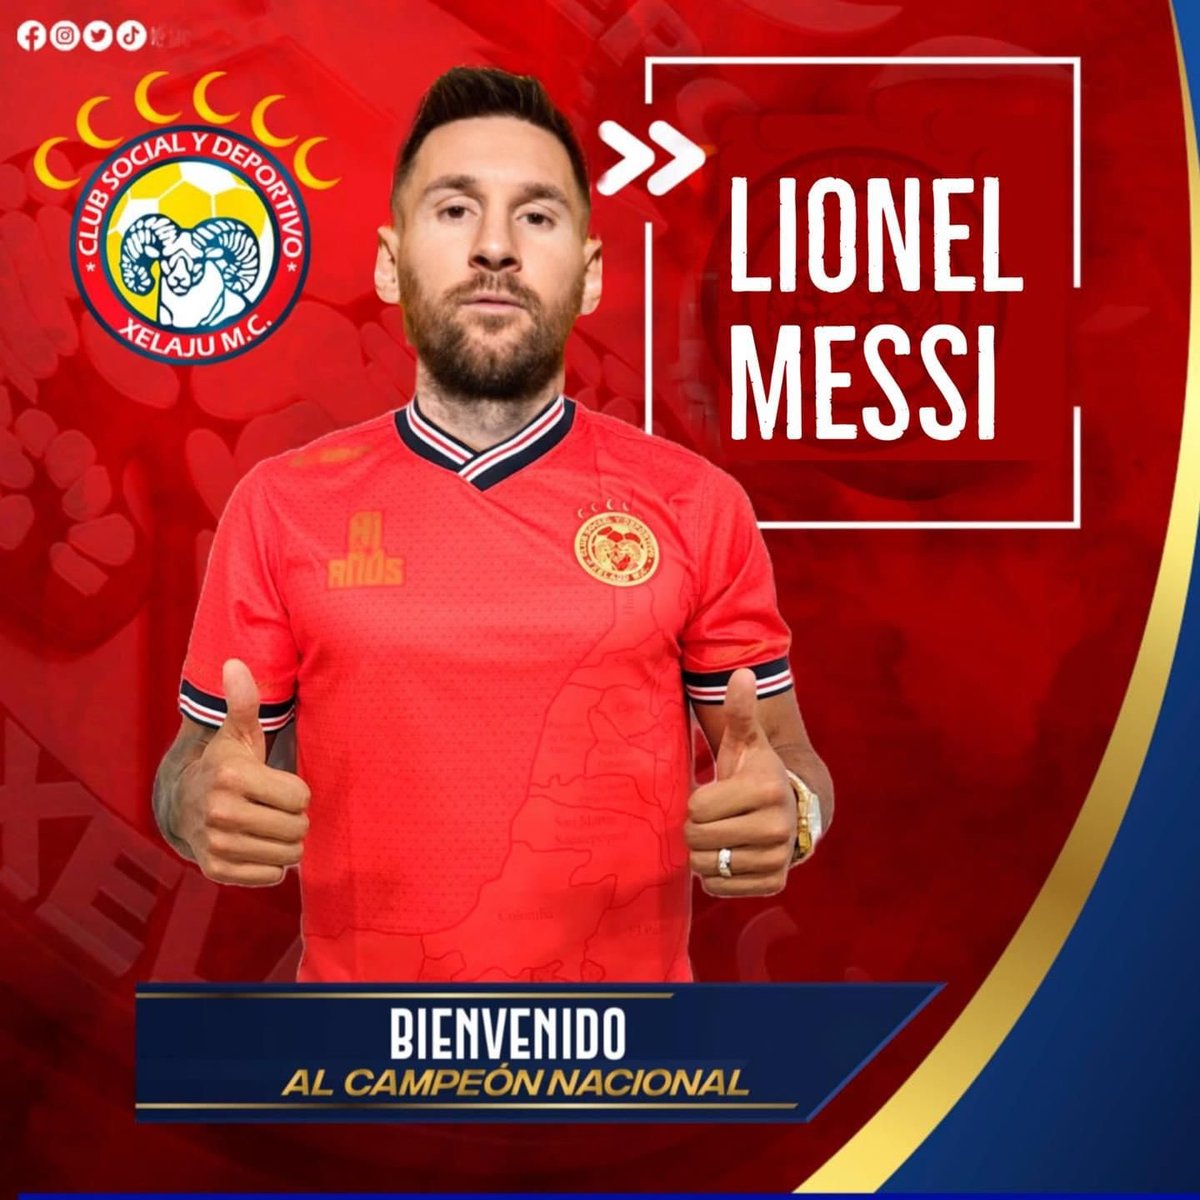 🚨| 𝐇𝐄𝐑𝐄 𝐖𝐄 𝐆𝐎: Lionel Messi

Xelajú MC have all documents in place to complete Lionel Messi signing for 23/24, here we go! 🔵🔴

◉ The agreement is in place since May as Messi has accepted to join Xelajú as free agent next season.